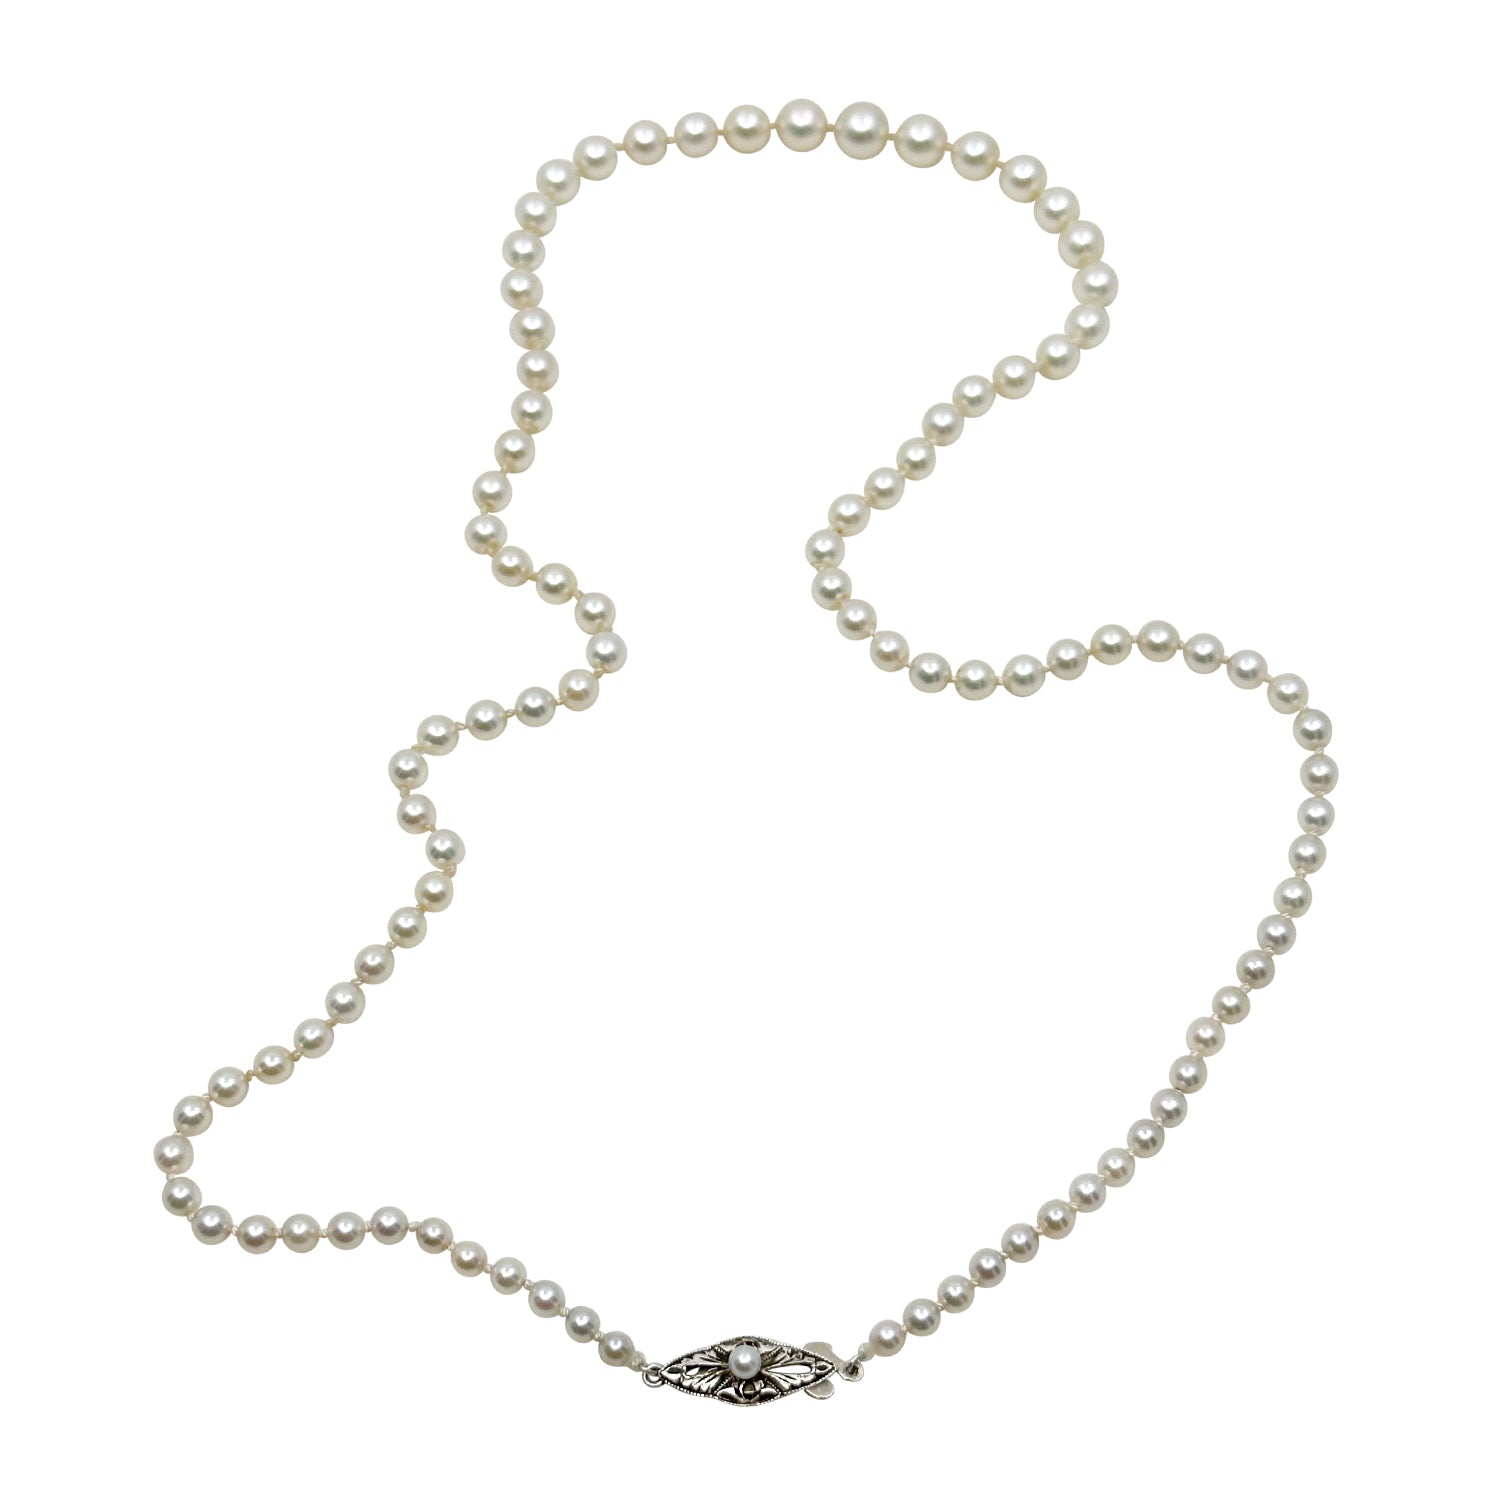 Engraved Art Deco Japanese Saltwater Cultured Akoya Pearl Graduated Necklace - Sterling Silver 16.50 Inch